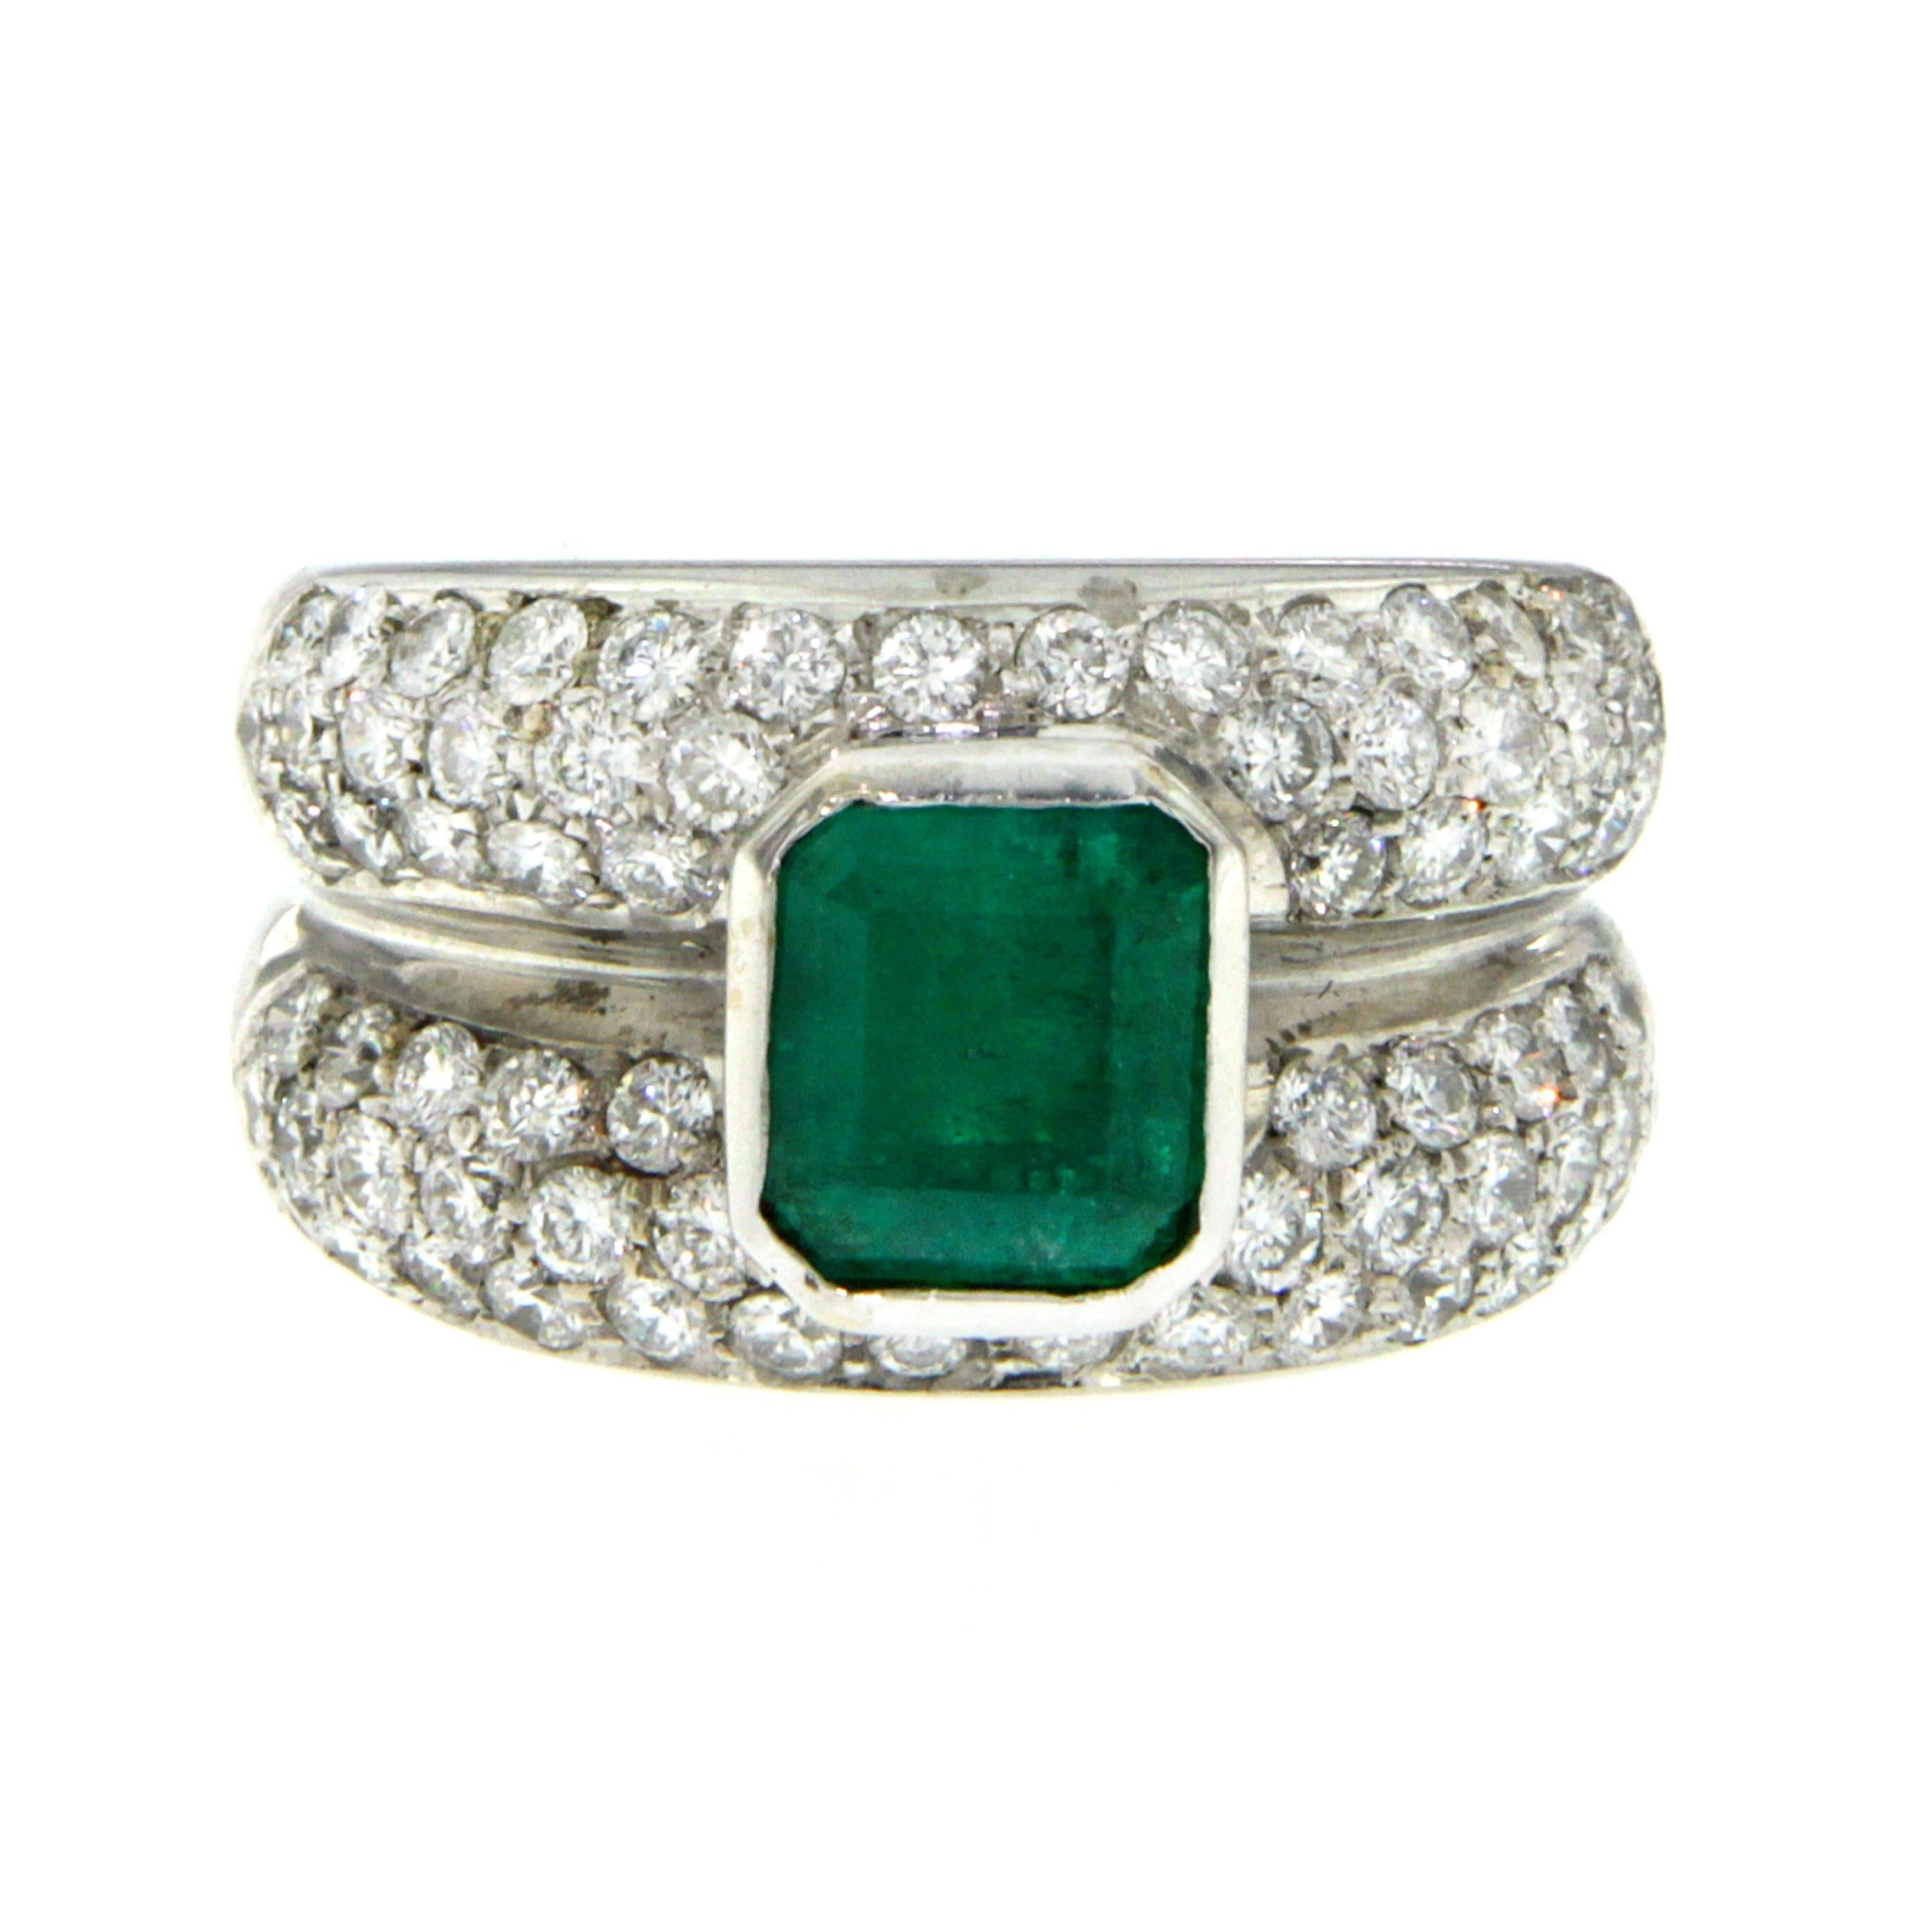 This beautiful handmade Emerald & Diamond Ring is crafted in 18k white Gold and it weighs approx. 18.8 grams.
The ring is set in the center with an Emerald-cut Colombian Emerald weighing approx. 2.50 carat  surrounded by 3 lines at each side of